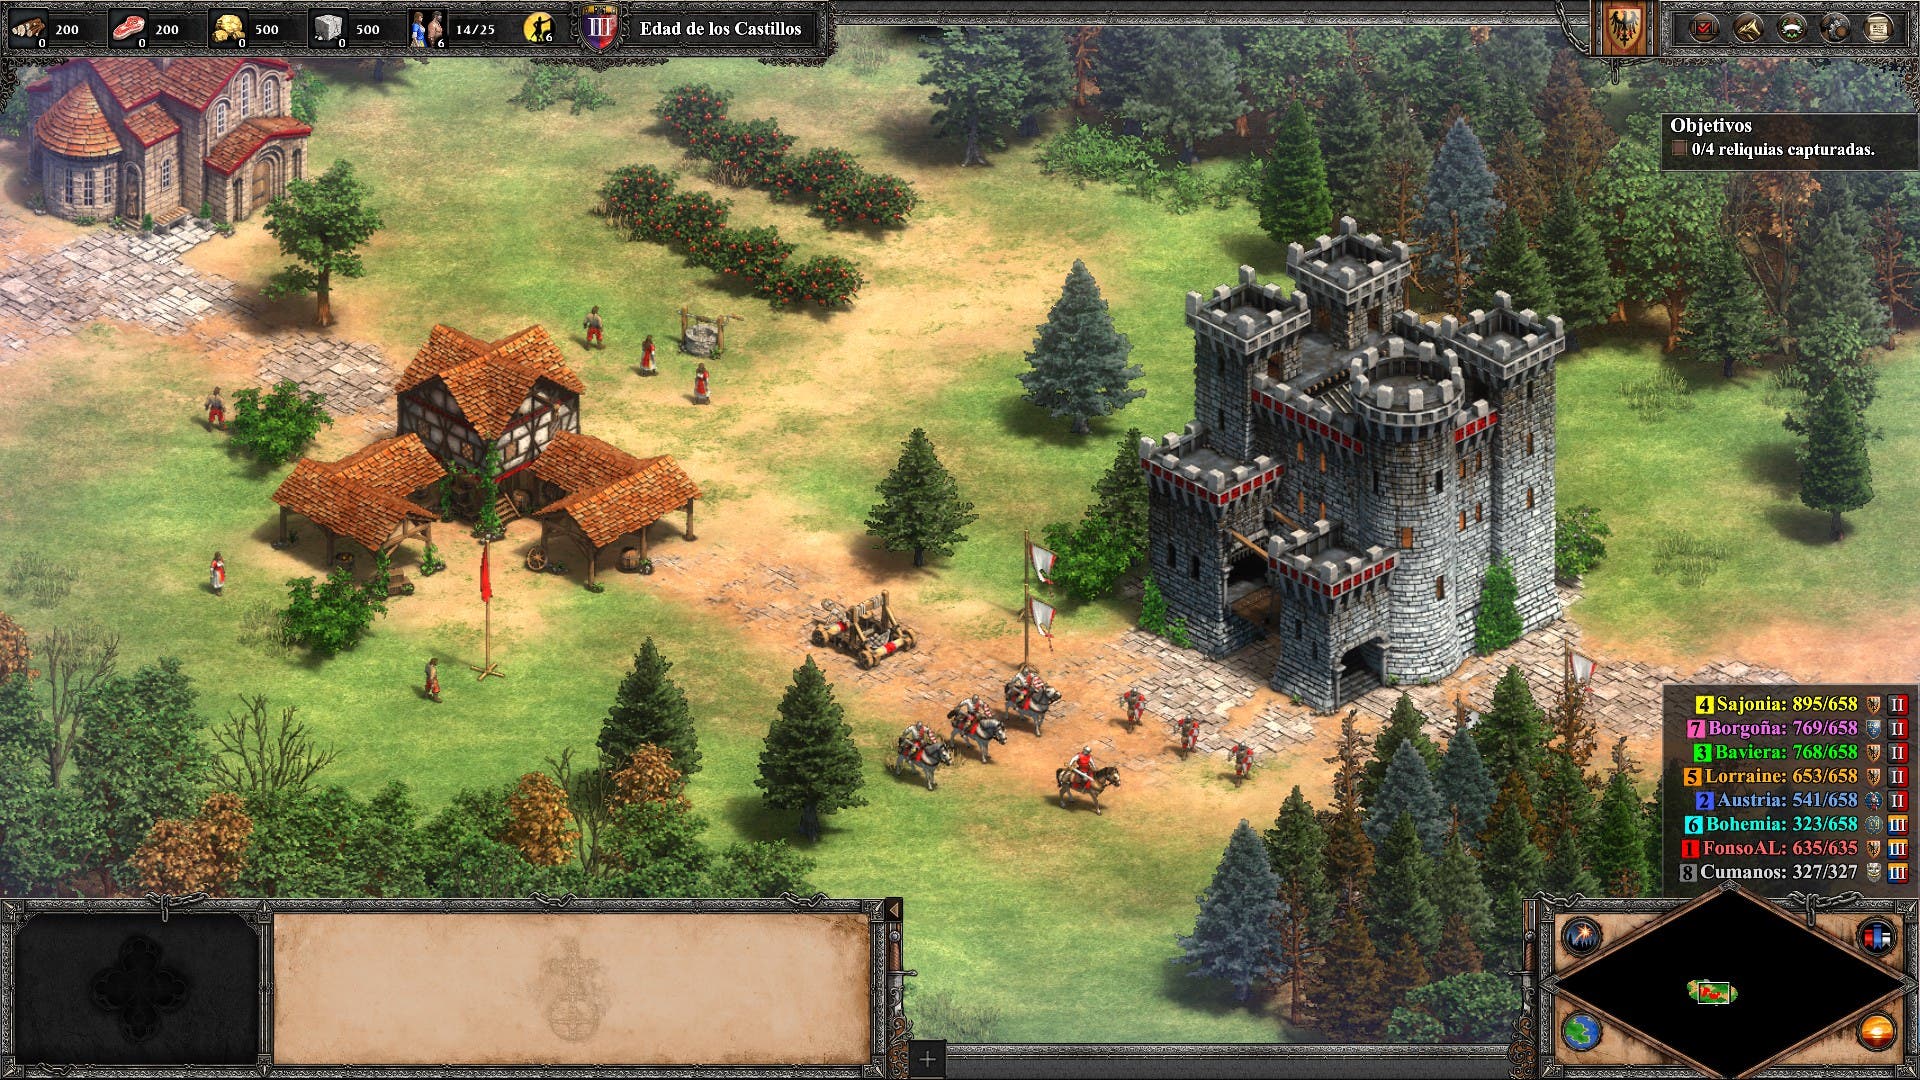 age of empires 2 definitive edition aoezone